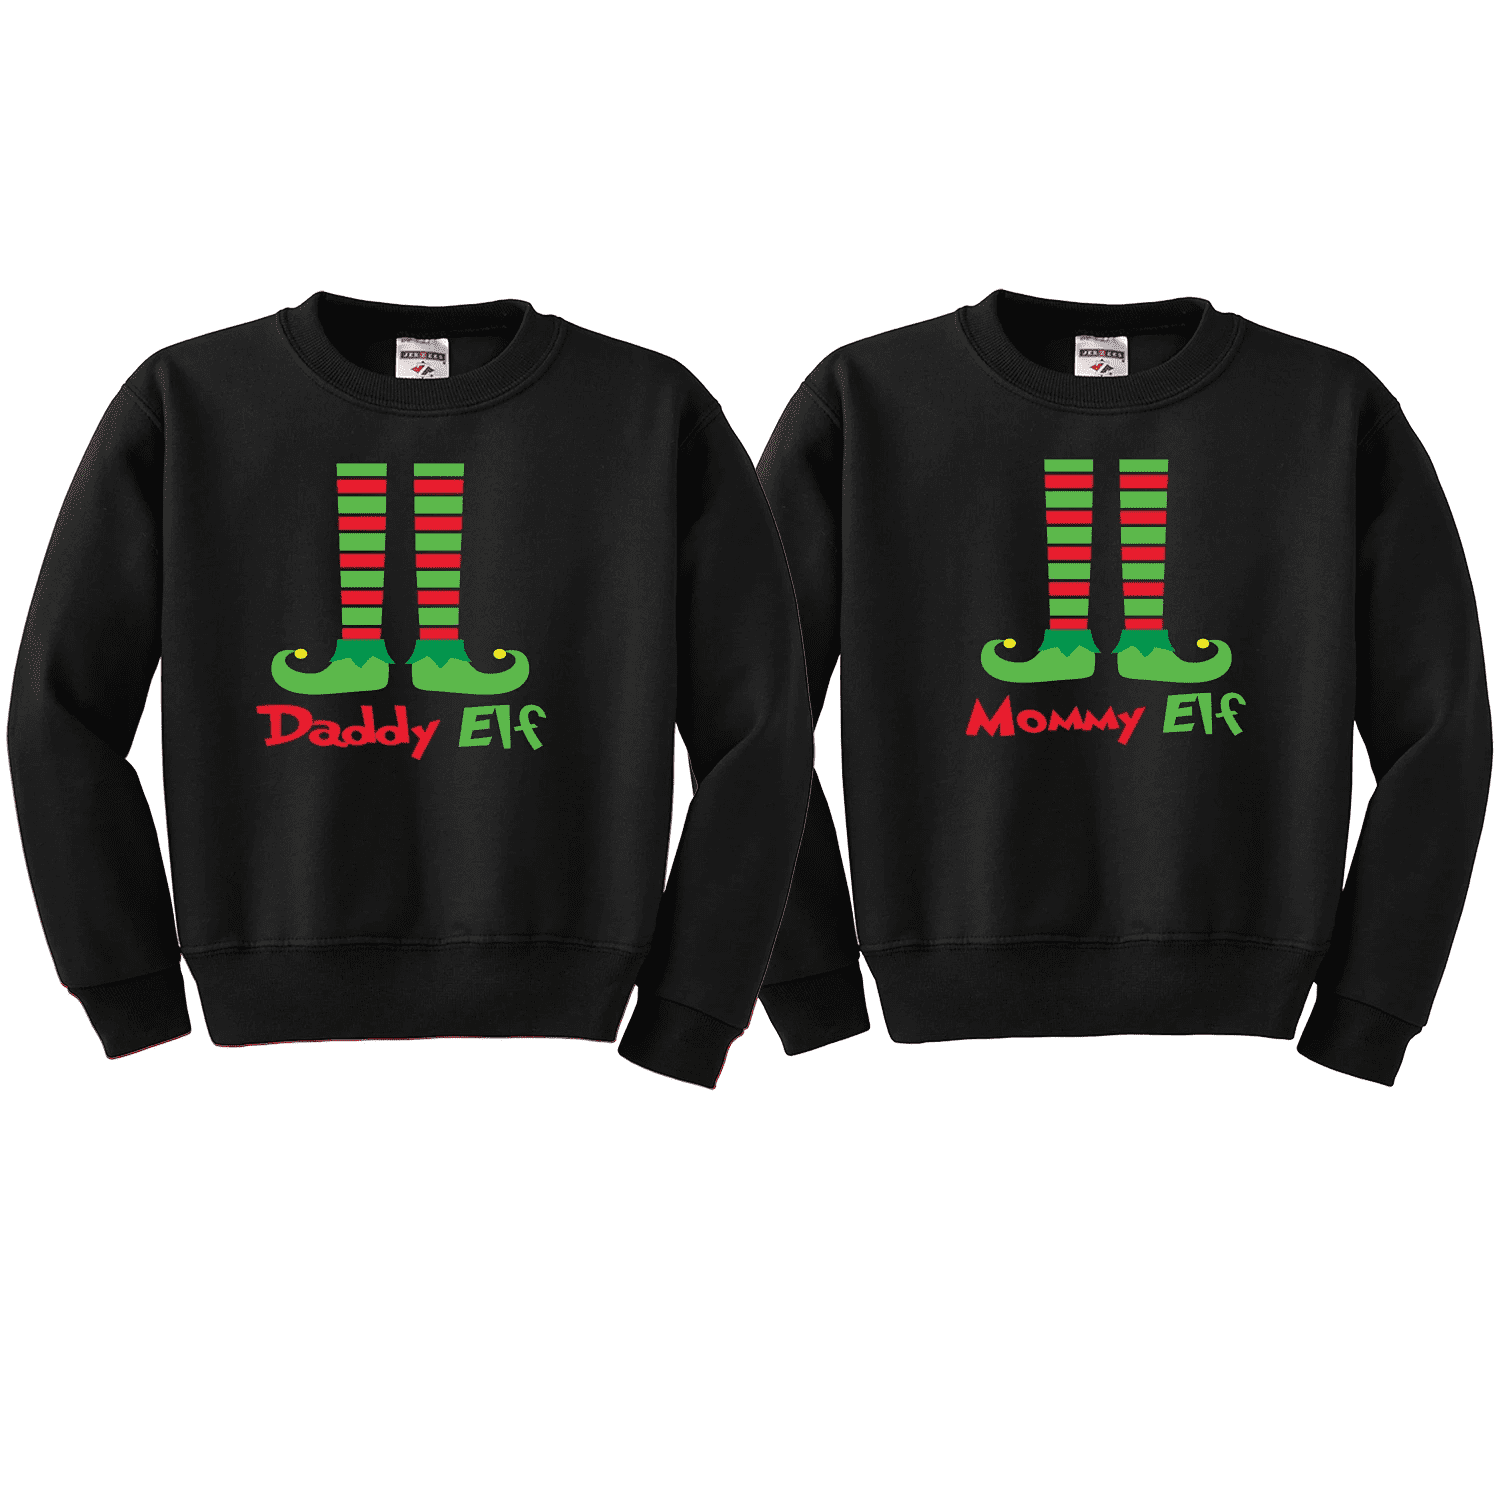 Novelty Christmas Unisex Two Person Sweater Couples Pullover  Blouse Tops Shirt